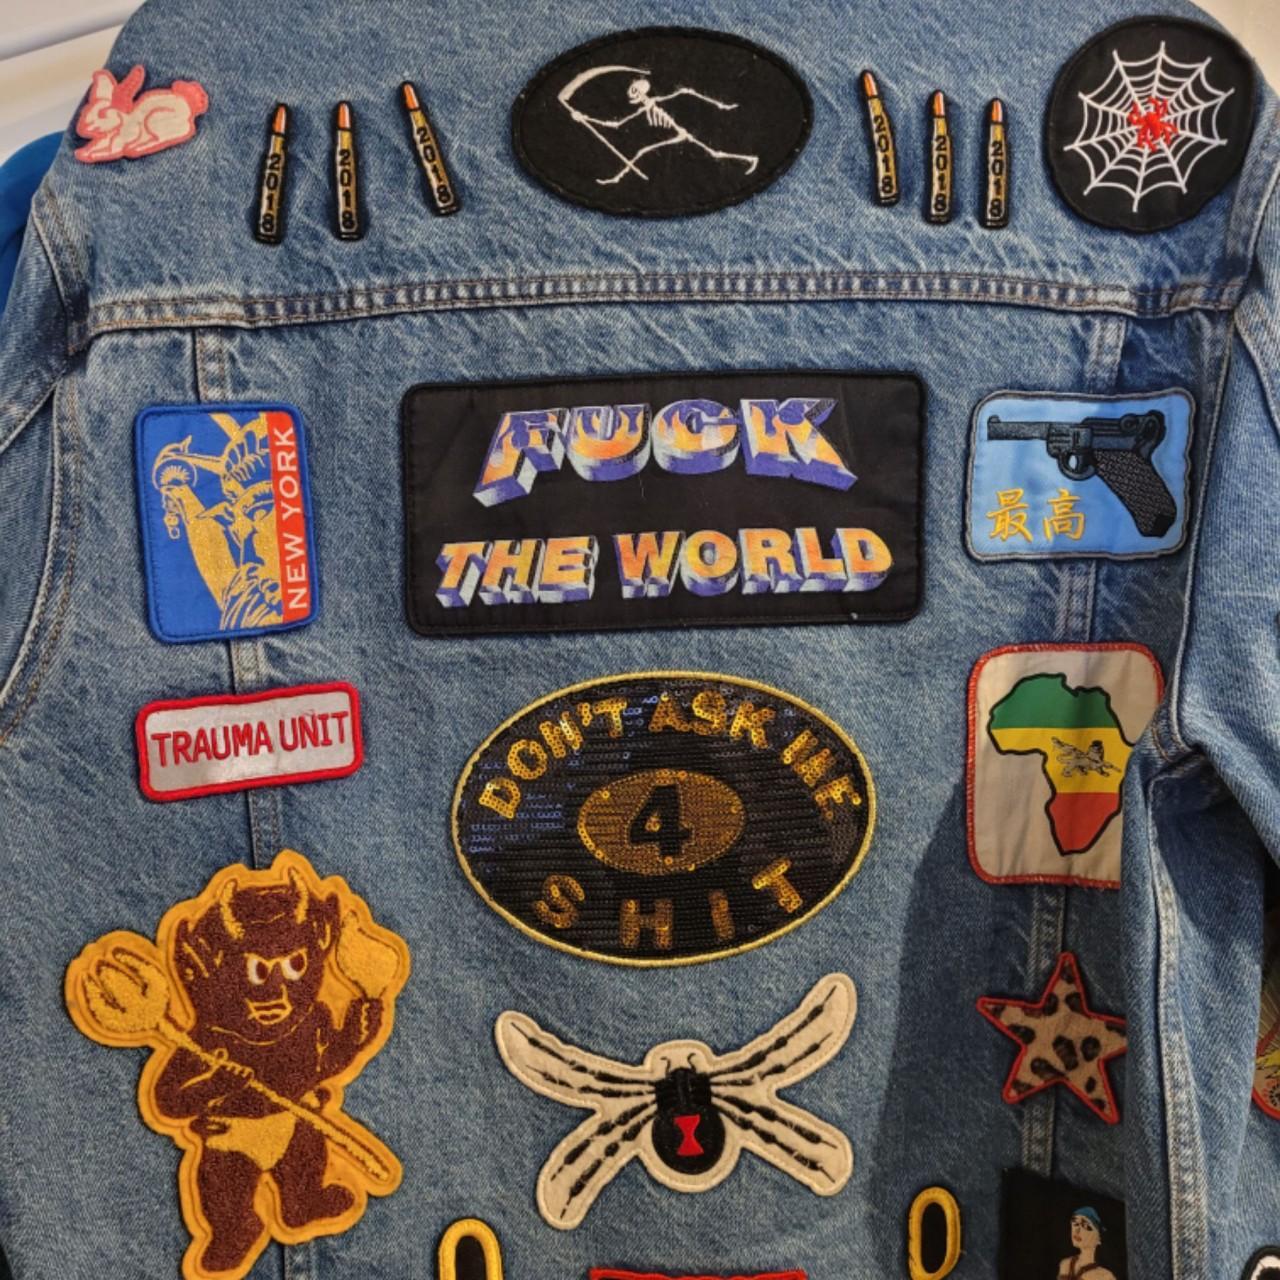 Supreme patches jacket from spring 2018 drop. Worn - Depop